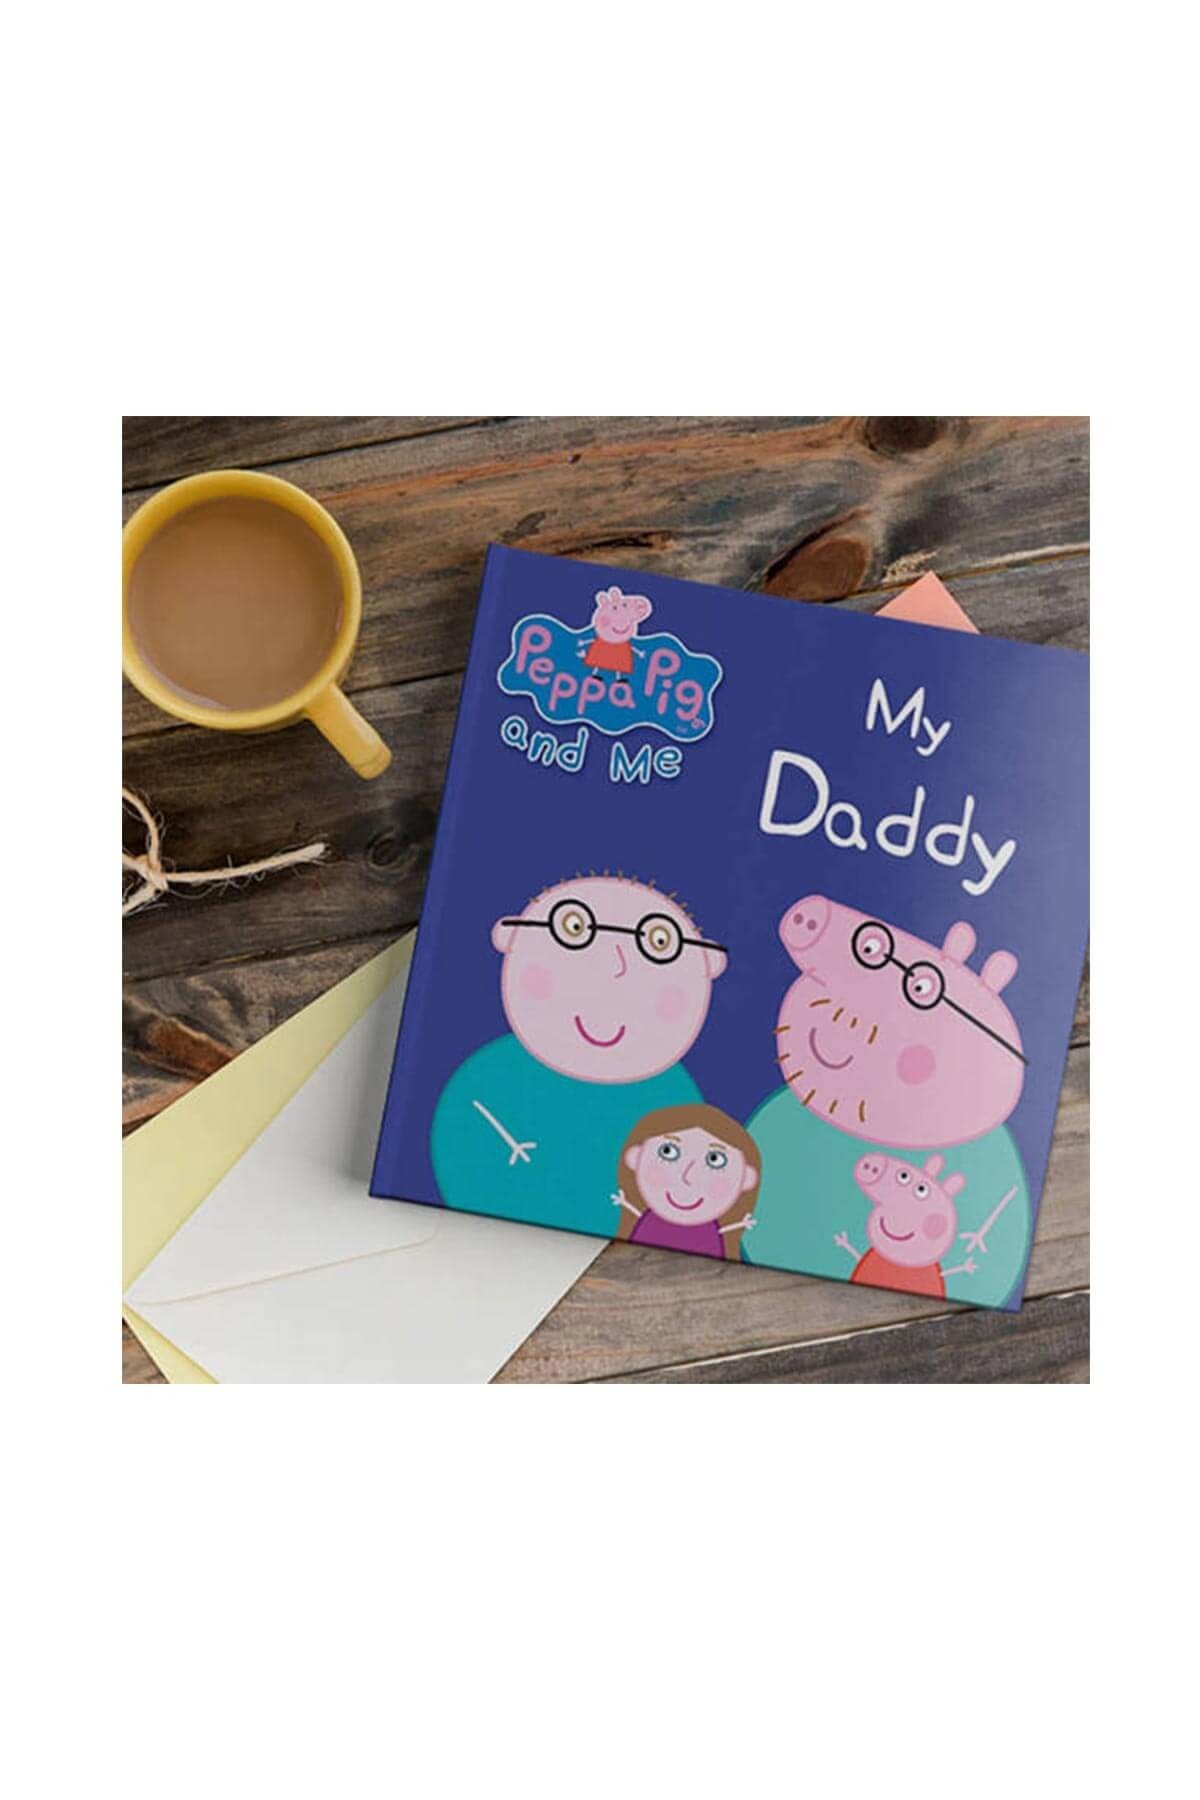 Peppa Pig: My Daddy And Me